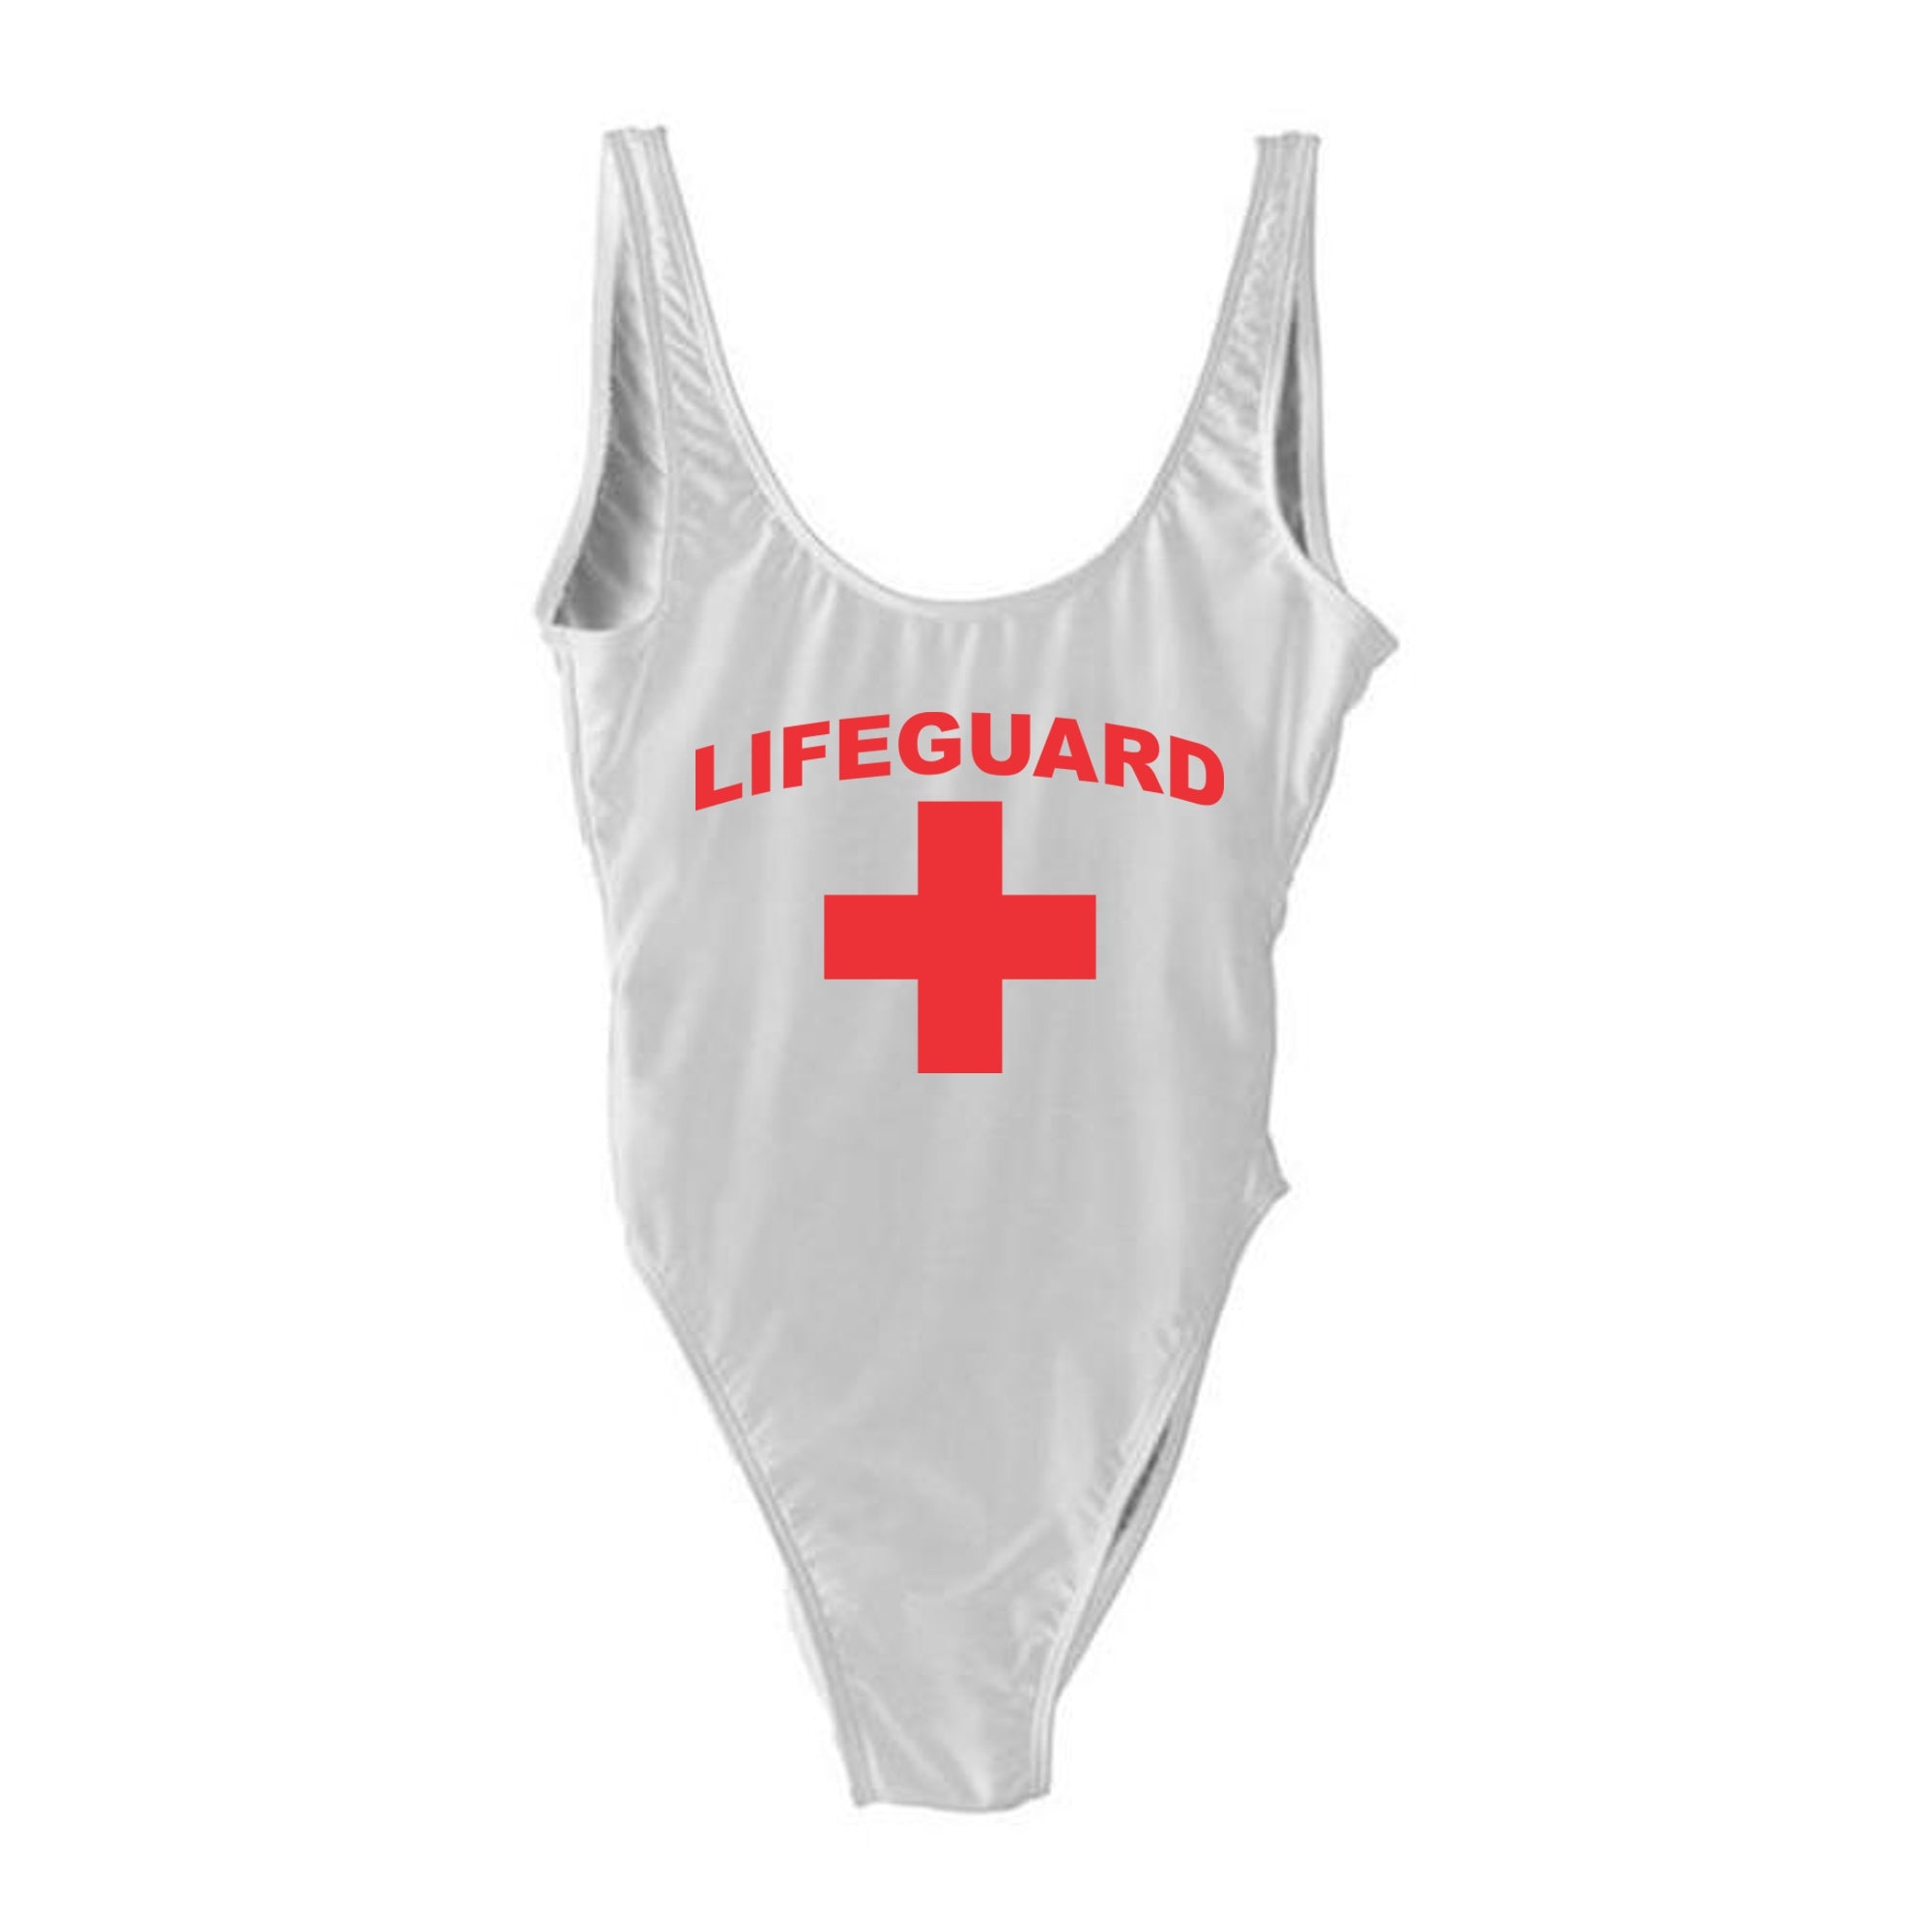 Lifeguard Costume Swimsuit Private Party 